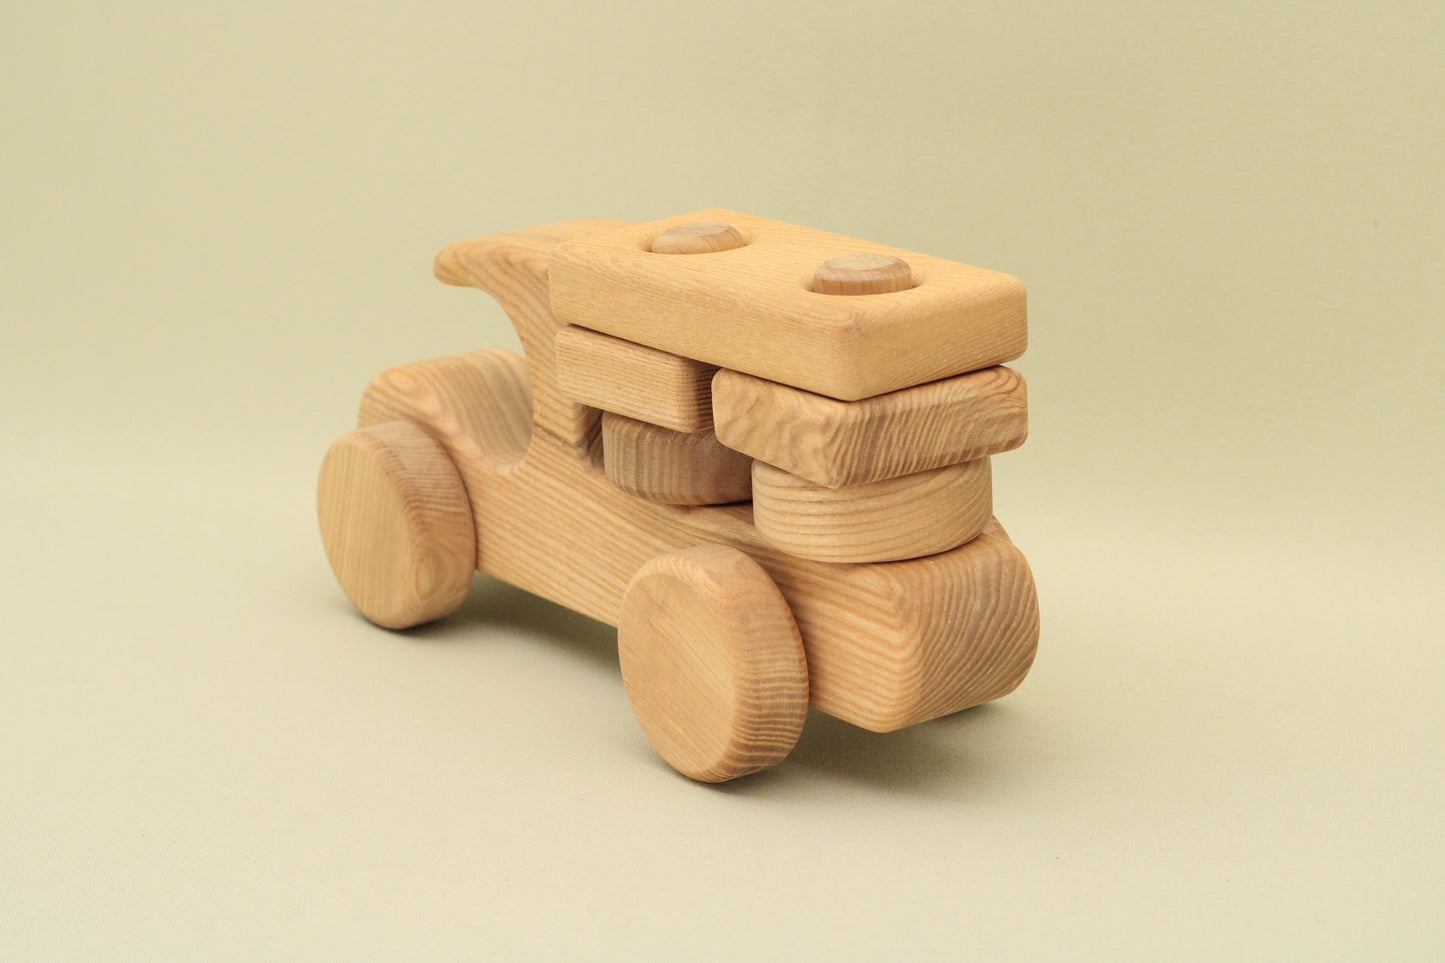 Lotes Toys Wooden Construction Vehicles Car BT24